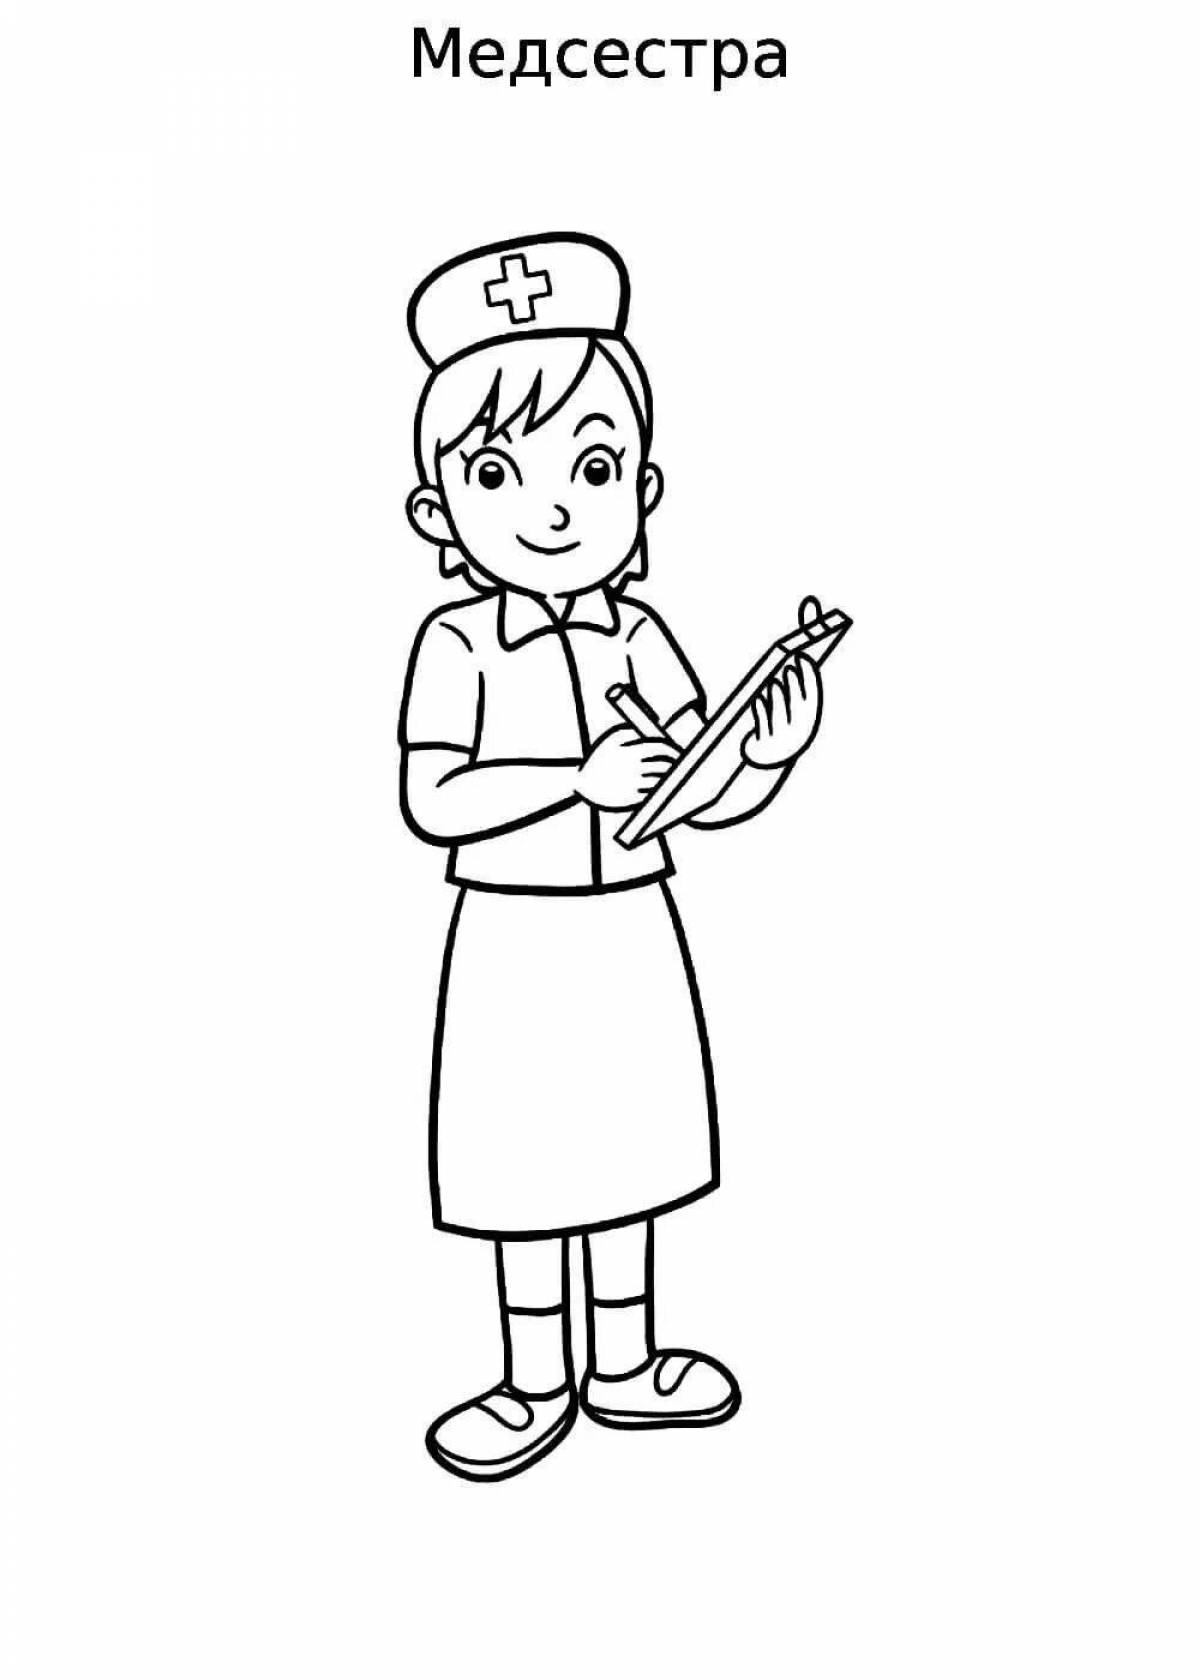 Great class 1 profession coloring book